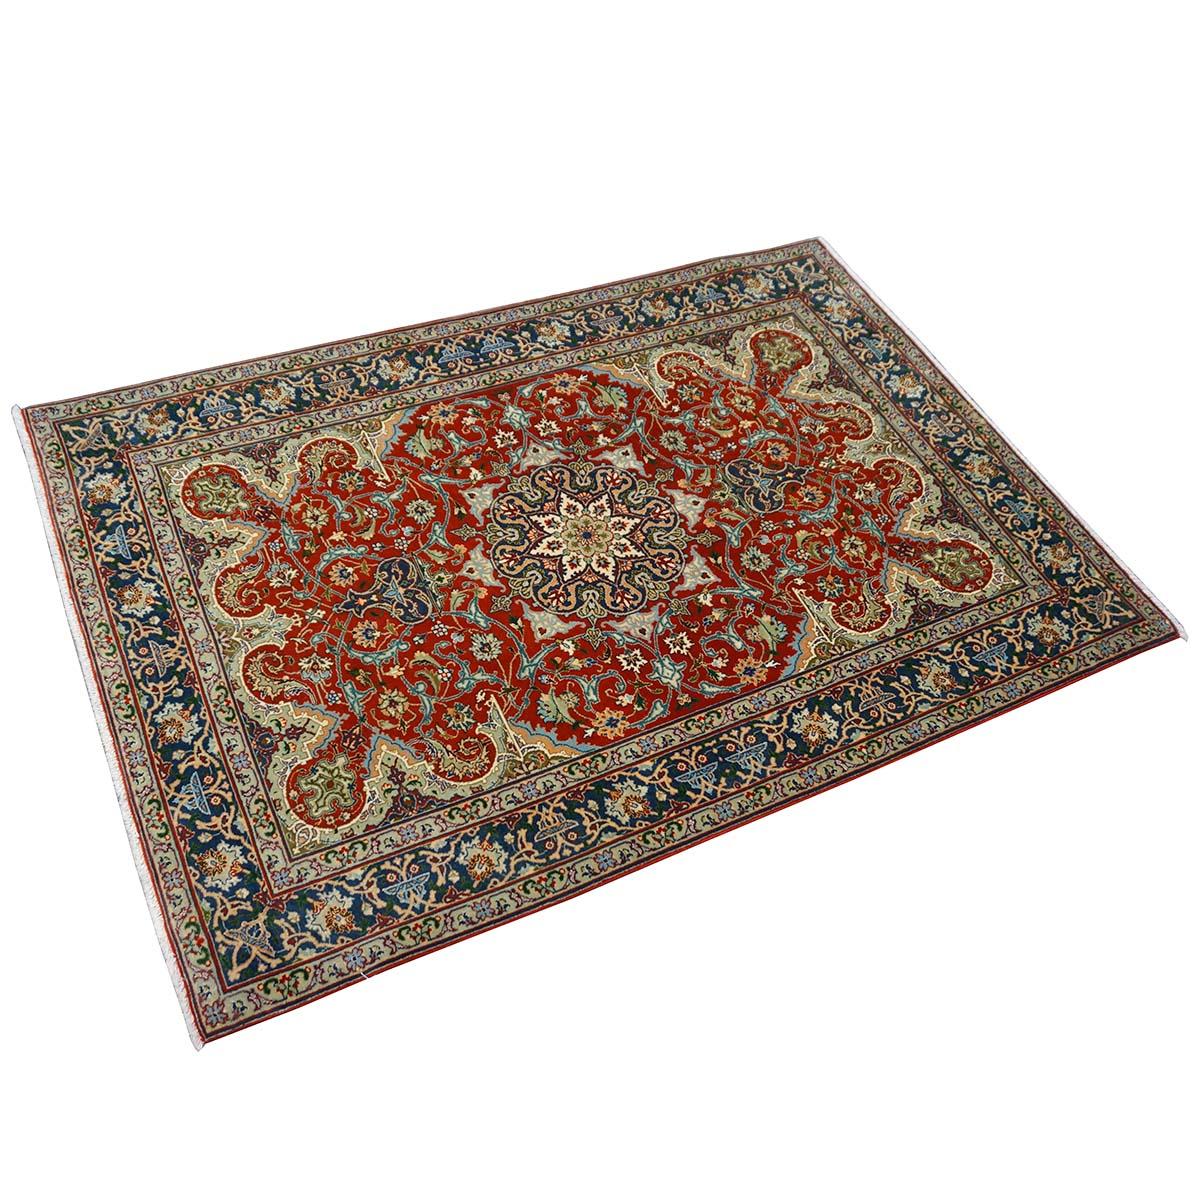 Mid-20th Century Antique 1940s Fine Persian Tabriz 3x4 Red, Navy, & Blue Handmade Area Rug For Sale